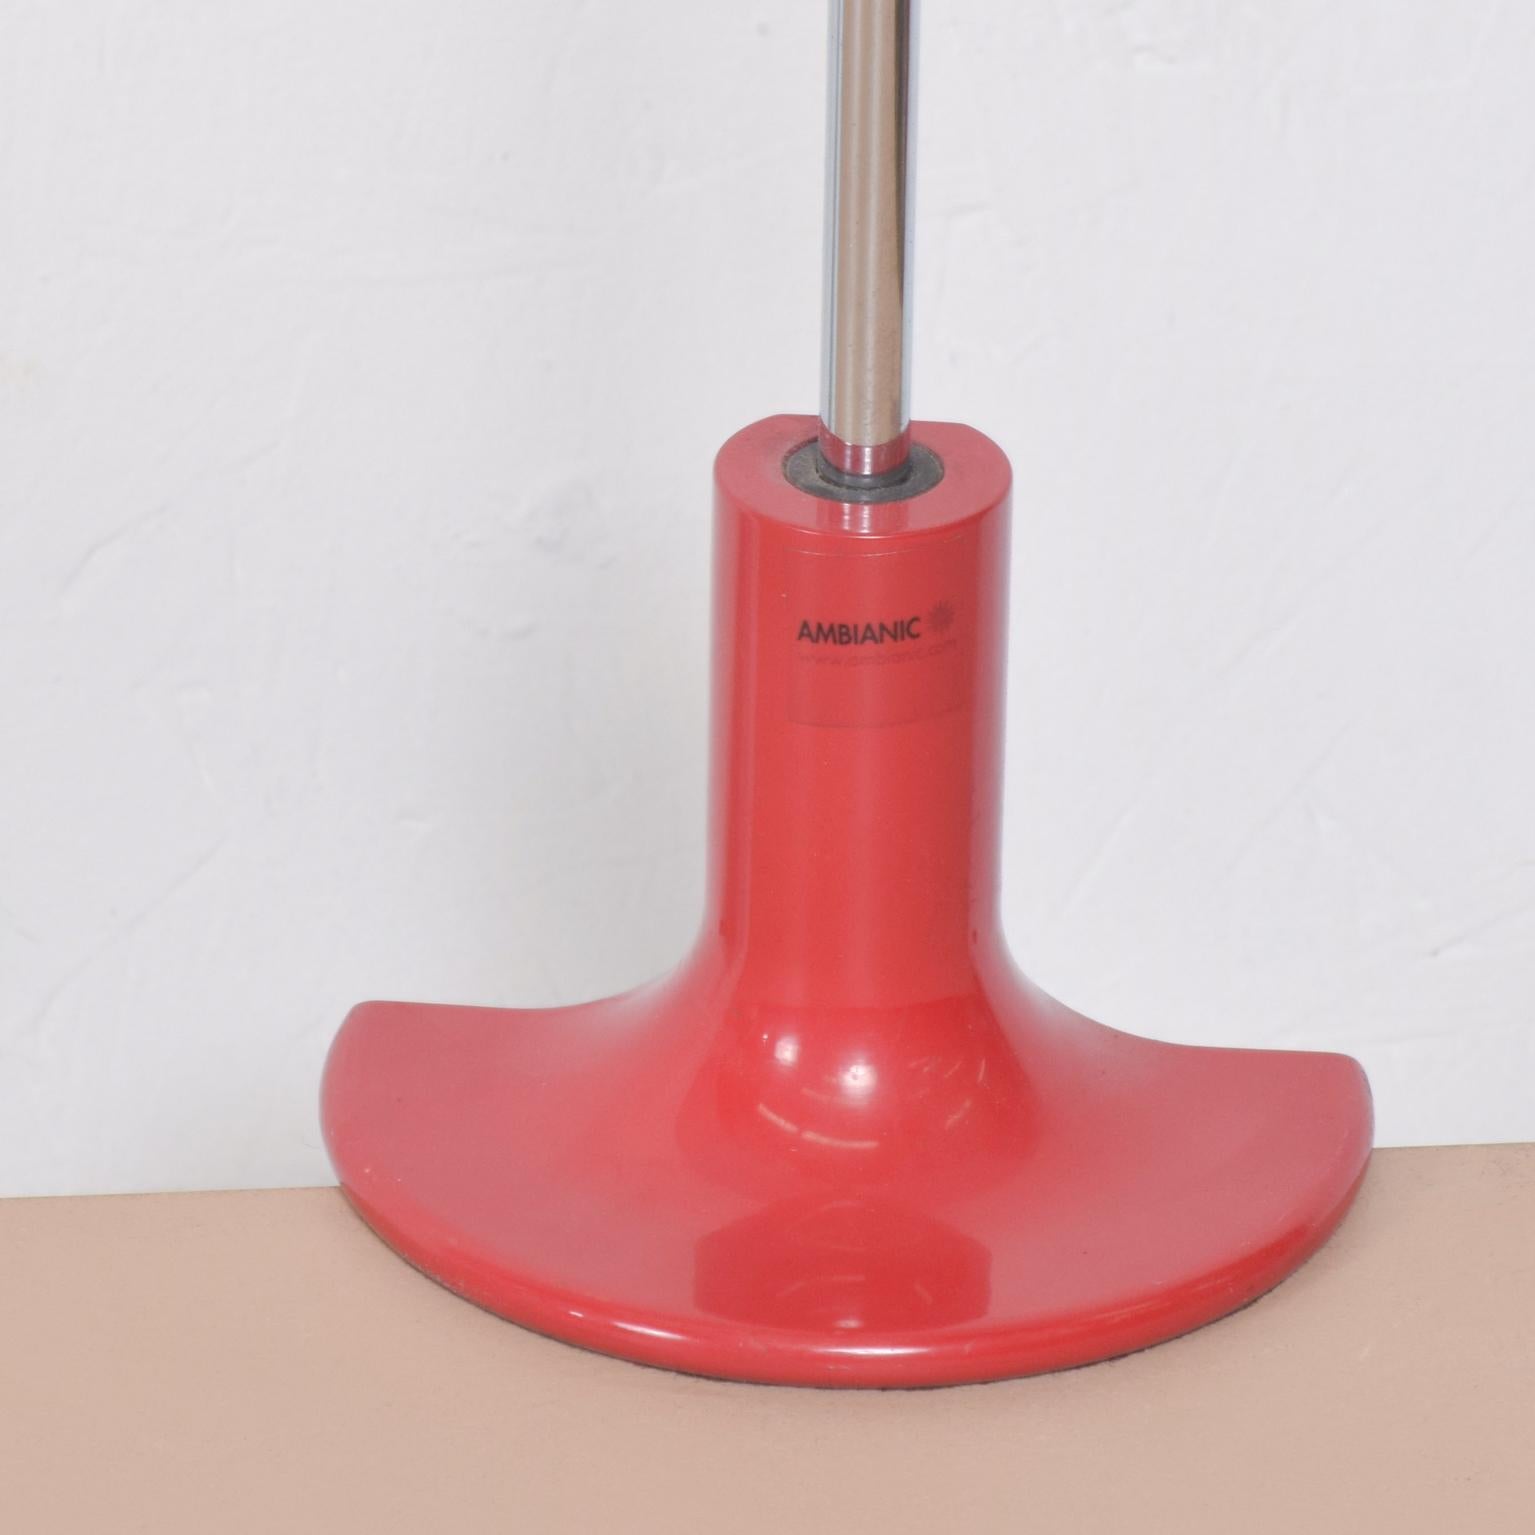 For your consideration: Minimalist Mid-Century Modern astonishing red spider table desk task lamp by Joe Colombo made in Italy circa 1960s.
Joe Colombo designed for O-Luce, in Italy.
Red tilting shade with chrome-plated stainless steel hardware.